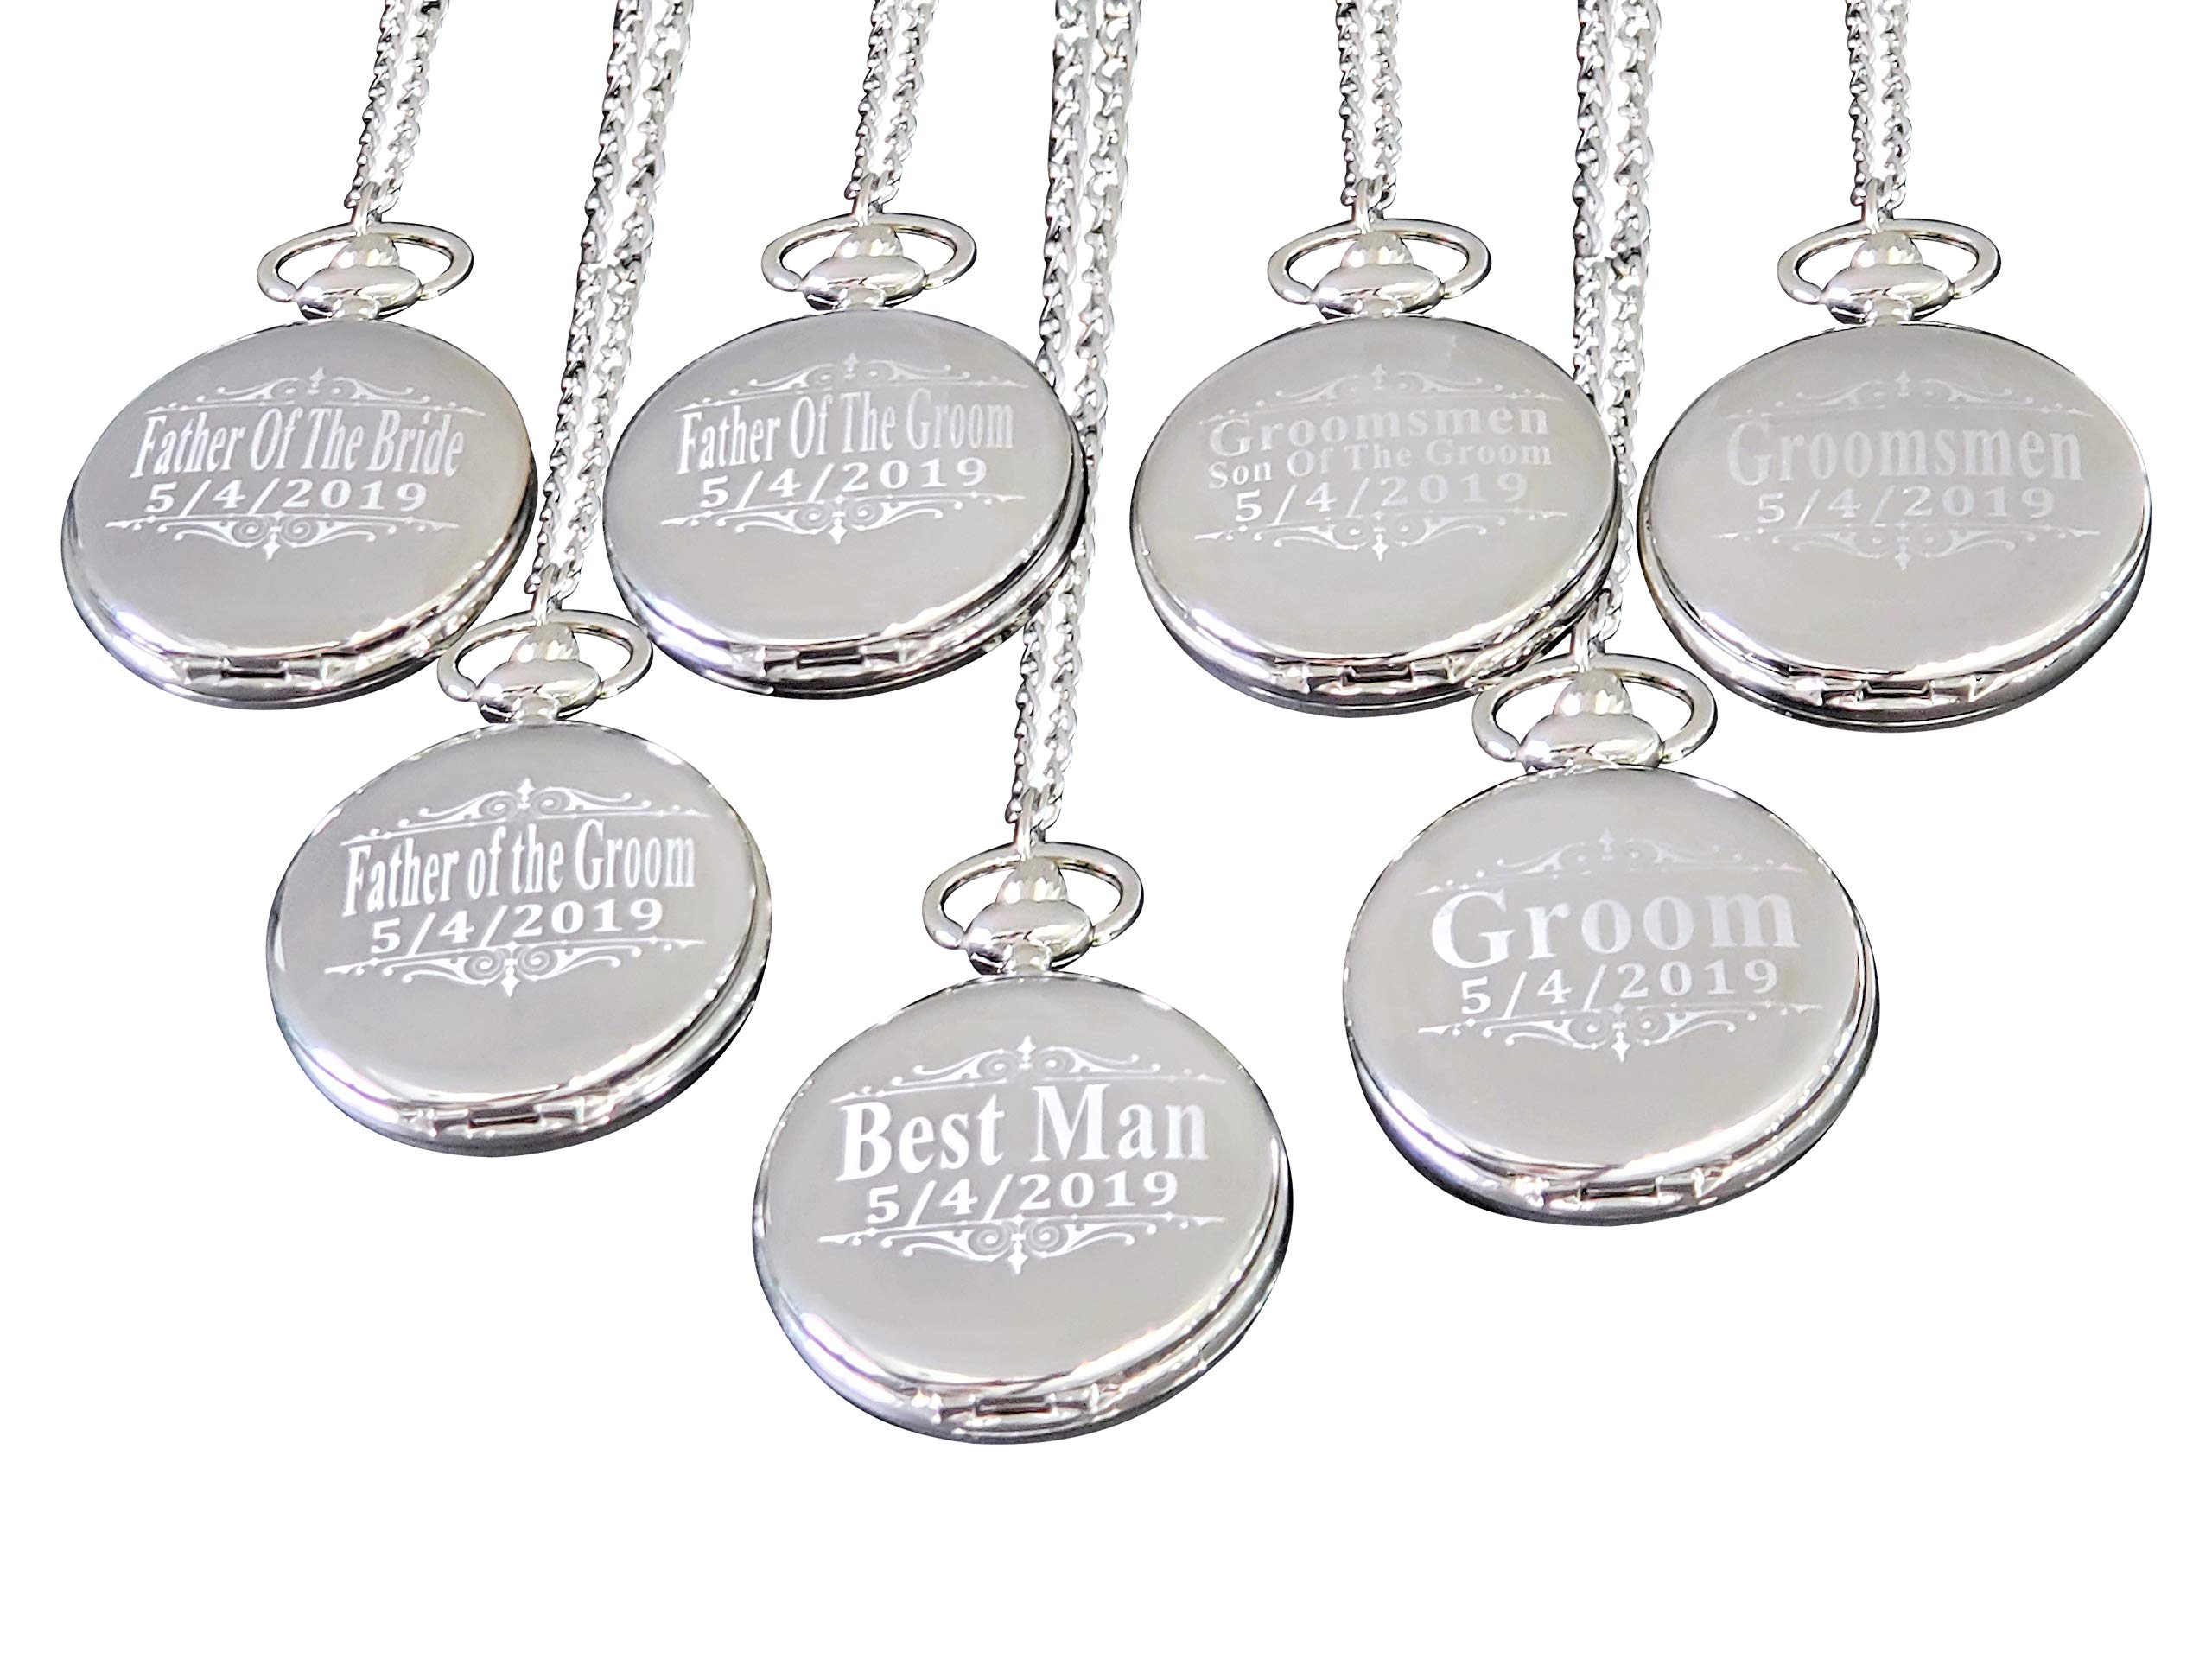 8 Personalized Pocket Watches, Set of 8 Groomsmen Wedding Unique Gifts, Chain, Box and Engraving Included, Comes in 4 Colors